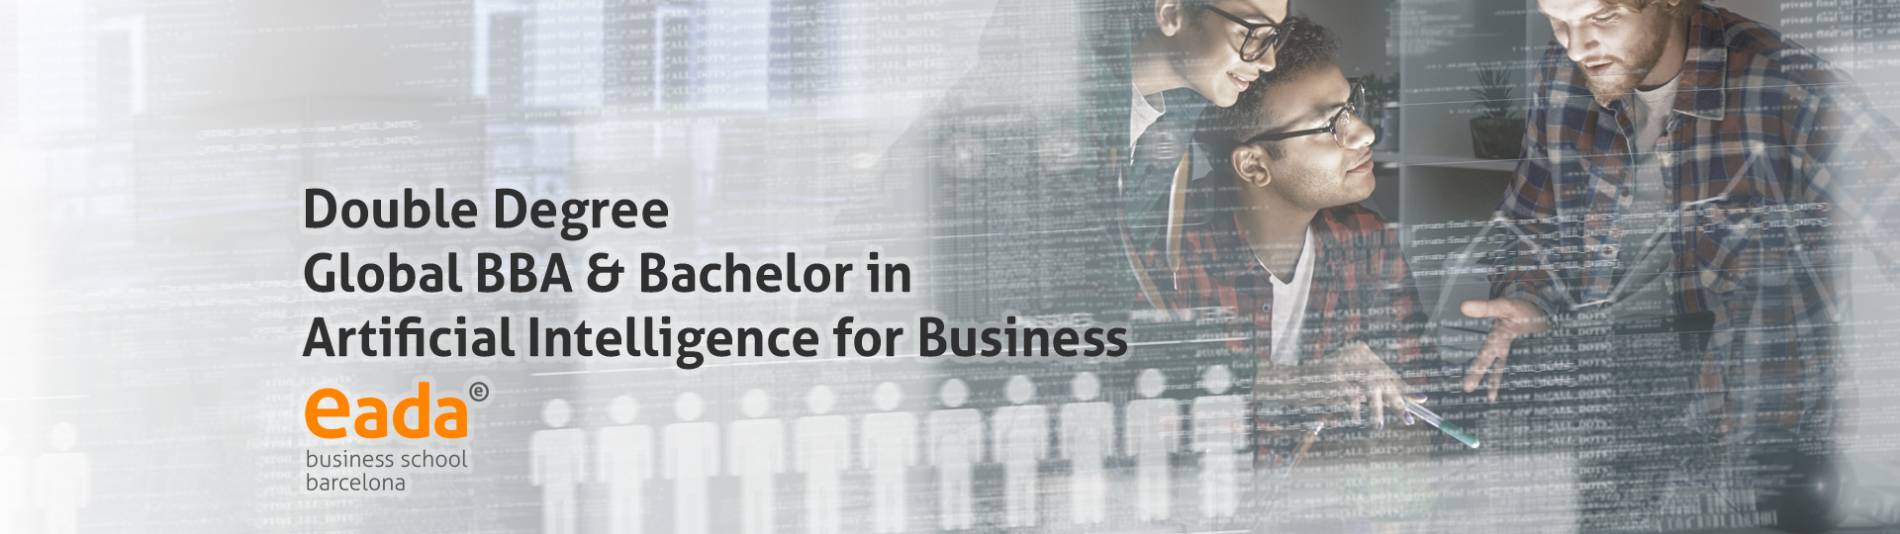 Double Degree Global BBA and Bachelor in Artificial Intelligence for Business